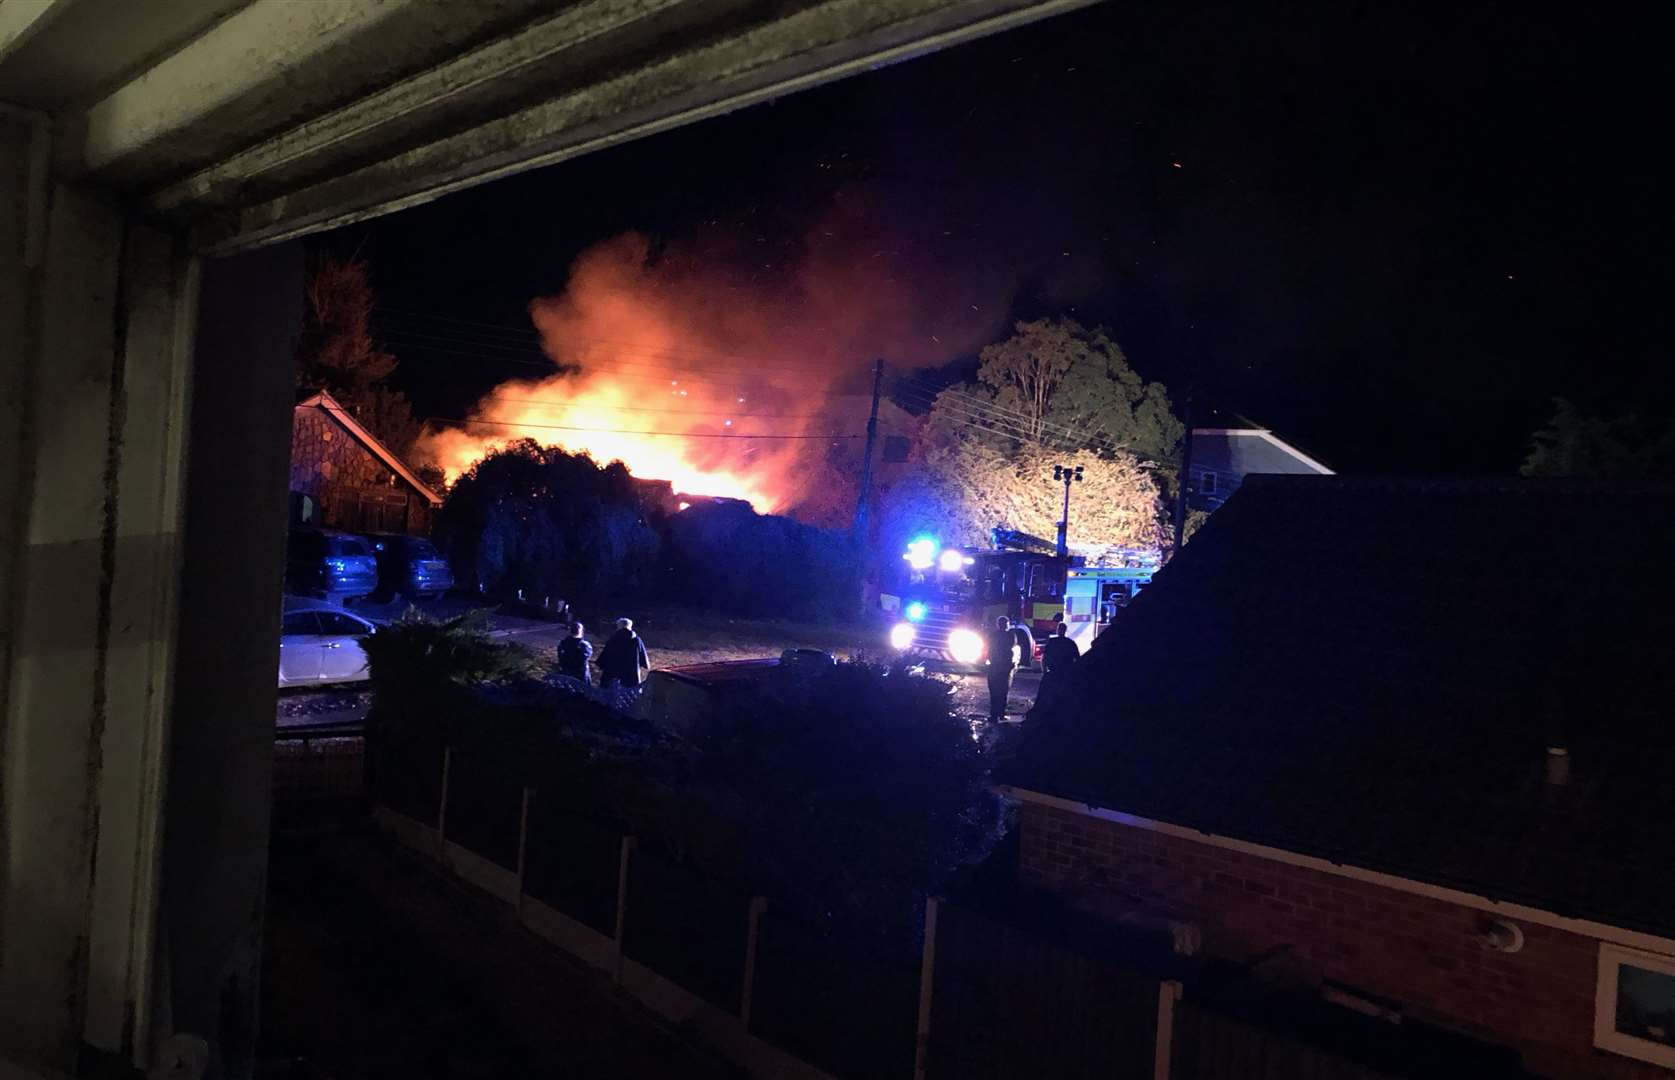 Firefighters were at the scene of the bungalow blaze until 9am on Tuesday morningPicture: Stephen Mina-Jones